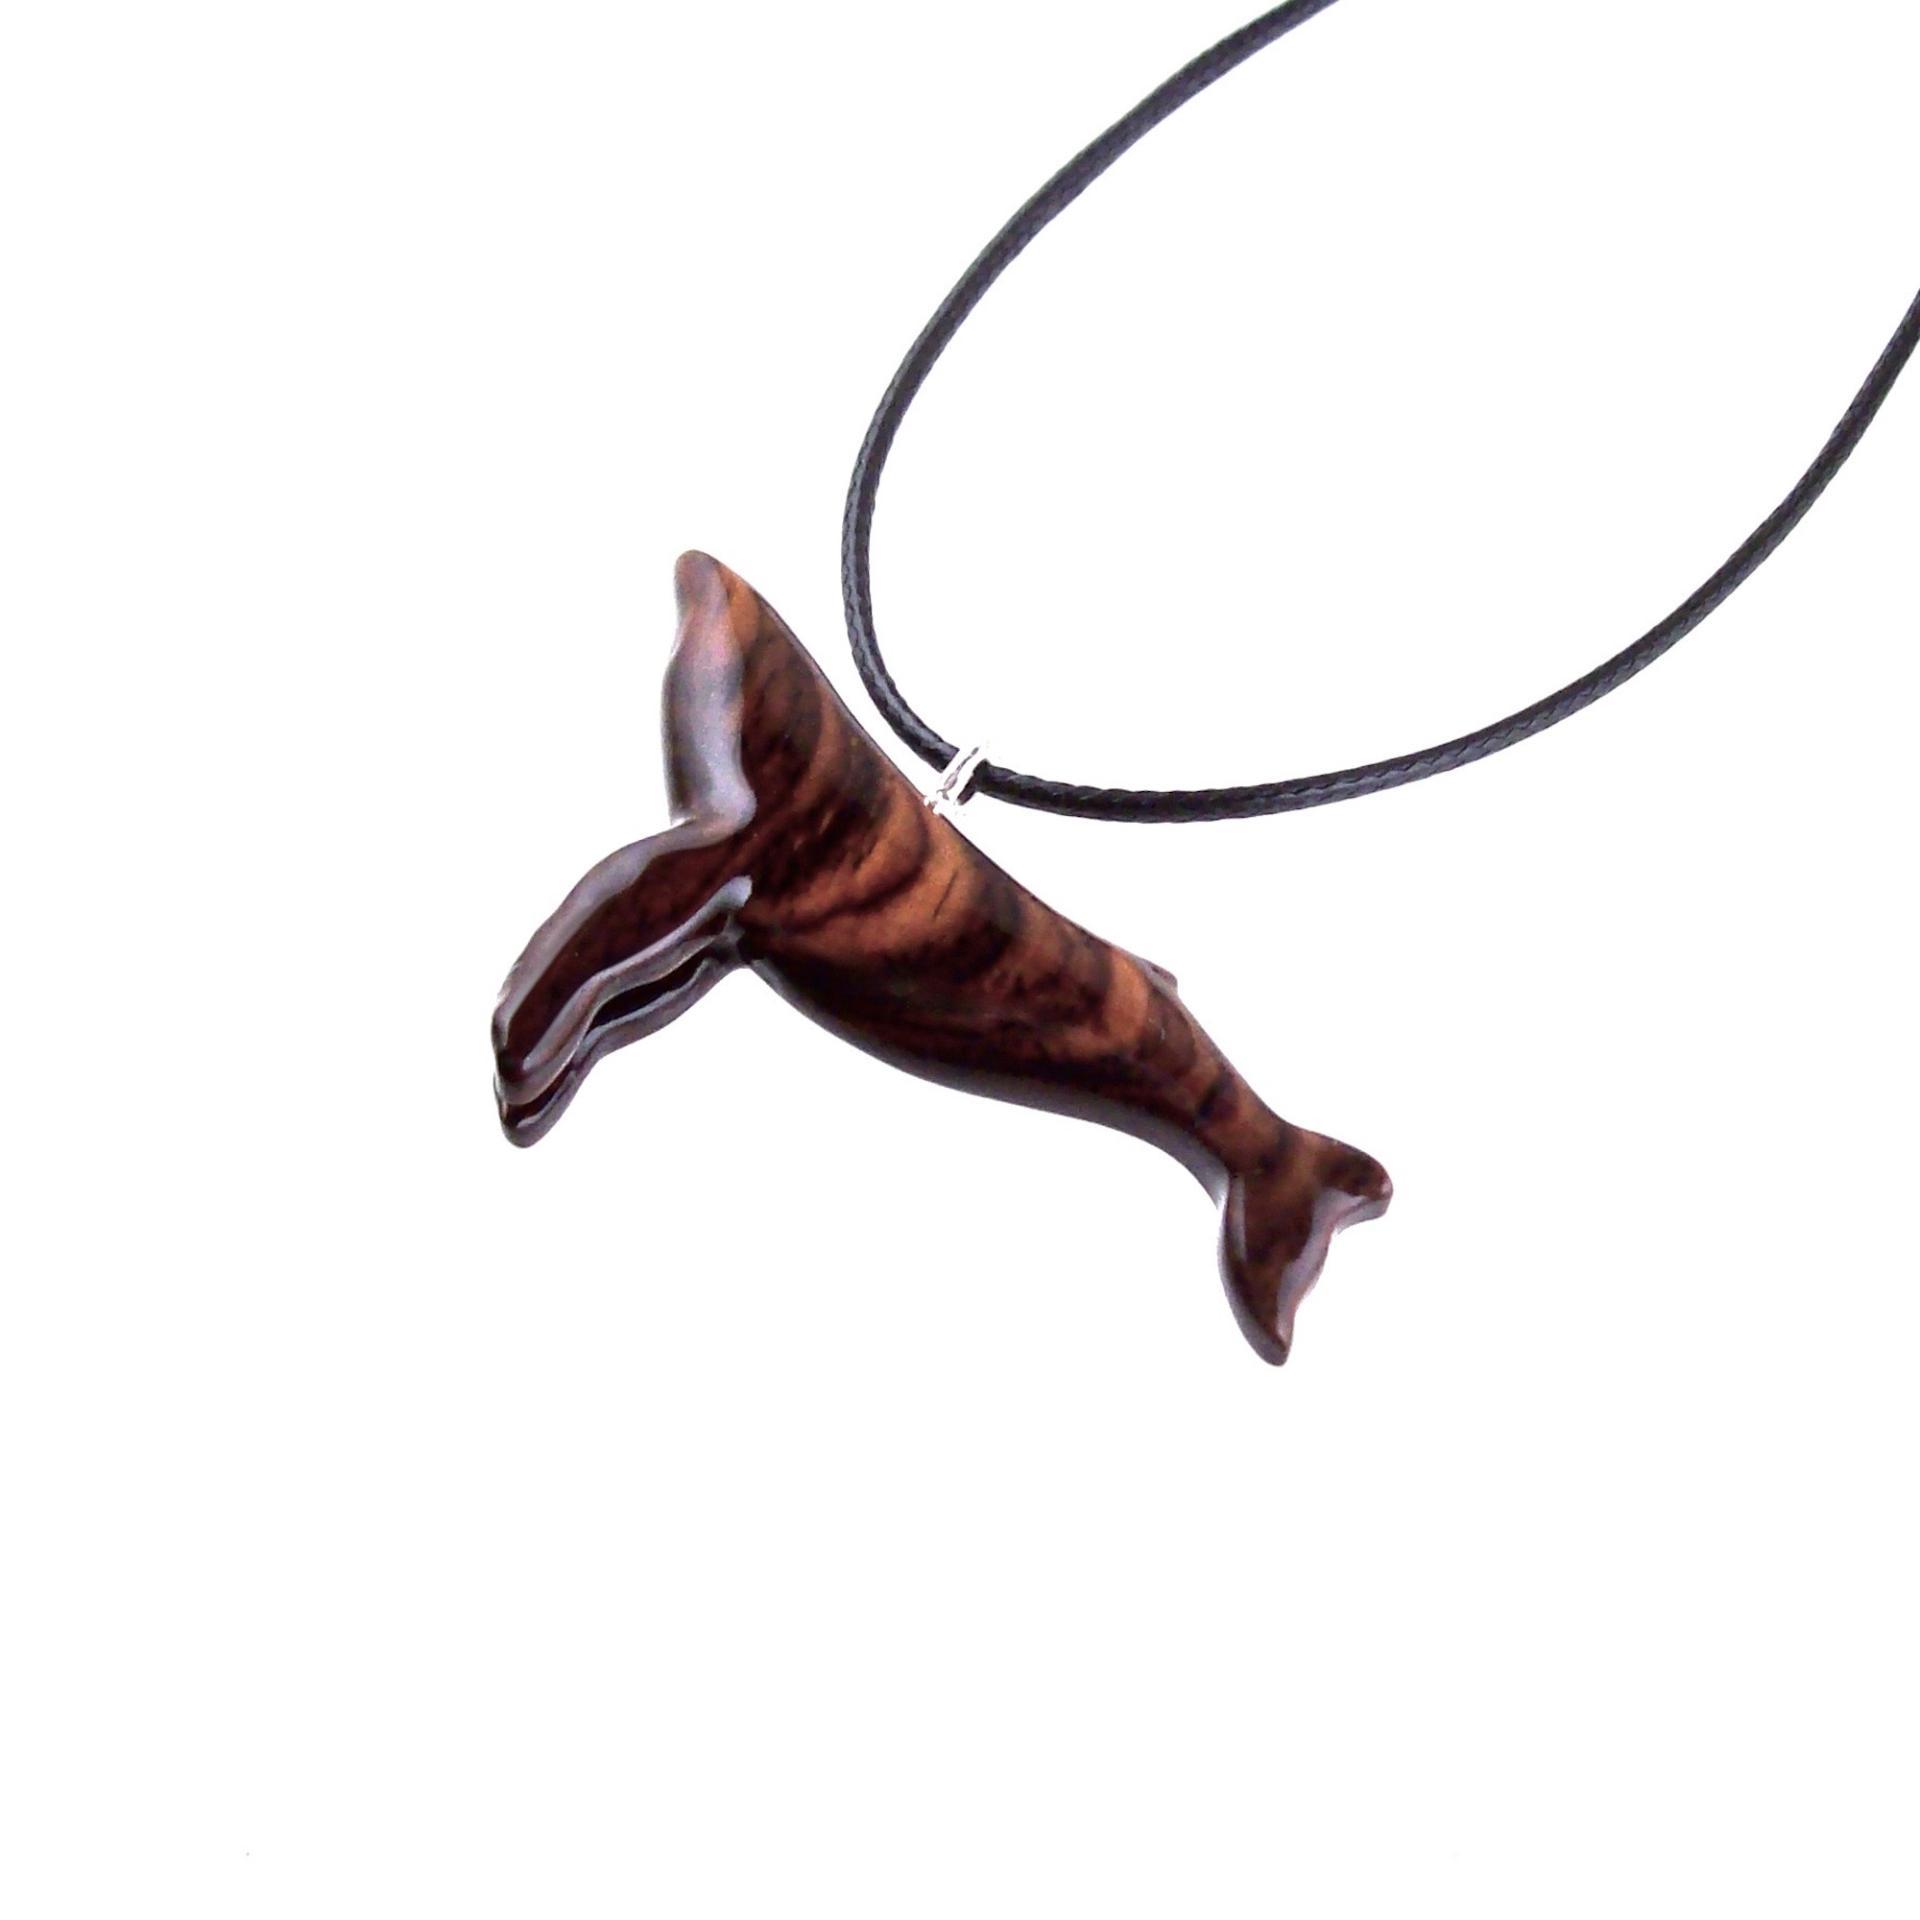 Humpback Whale Necklace, Hand Carved Wooden Sea Animal Pendant, Nautical Wood Jewelry, Whale-watcher Gift for Men Women